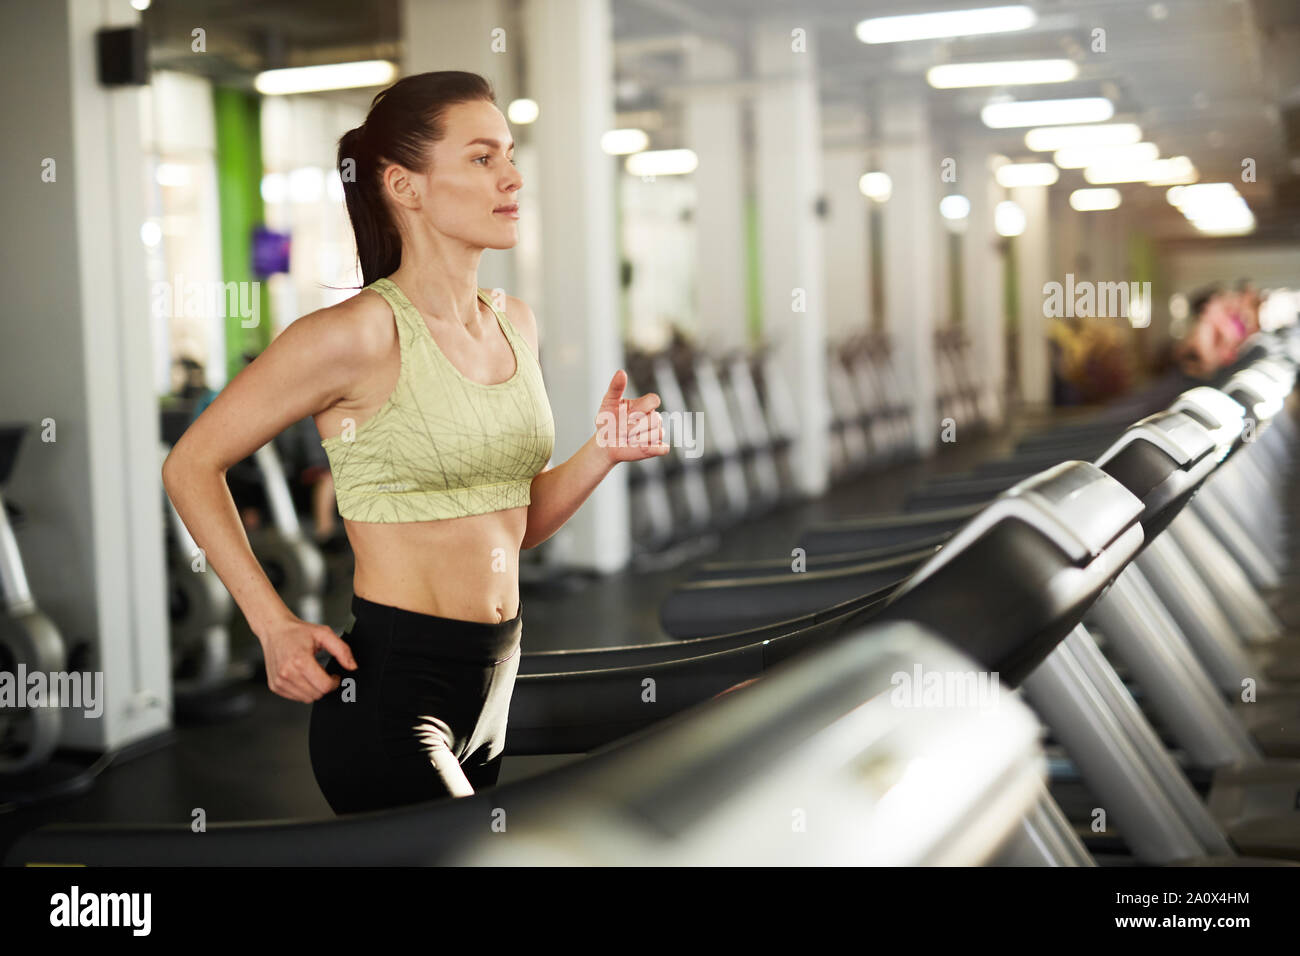 Side view portrait of sweaty young woman running on treadmill during cardio workout in empty gym, copy space Stock Photo